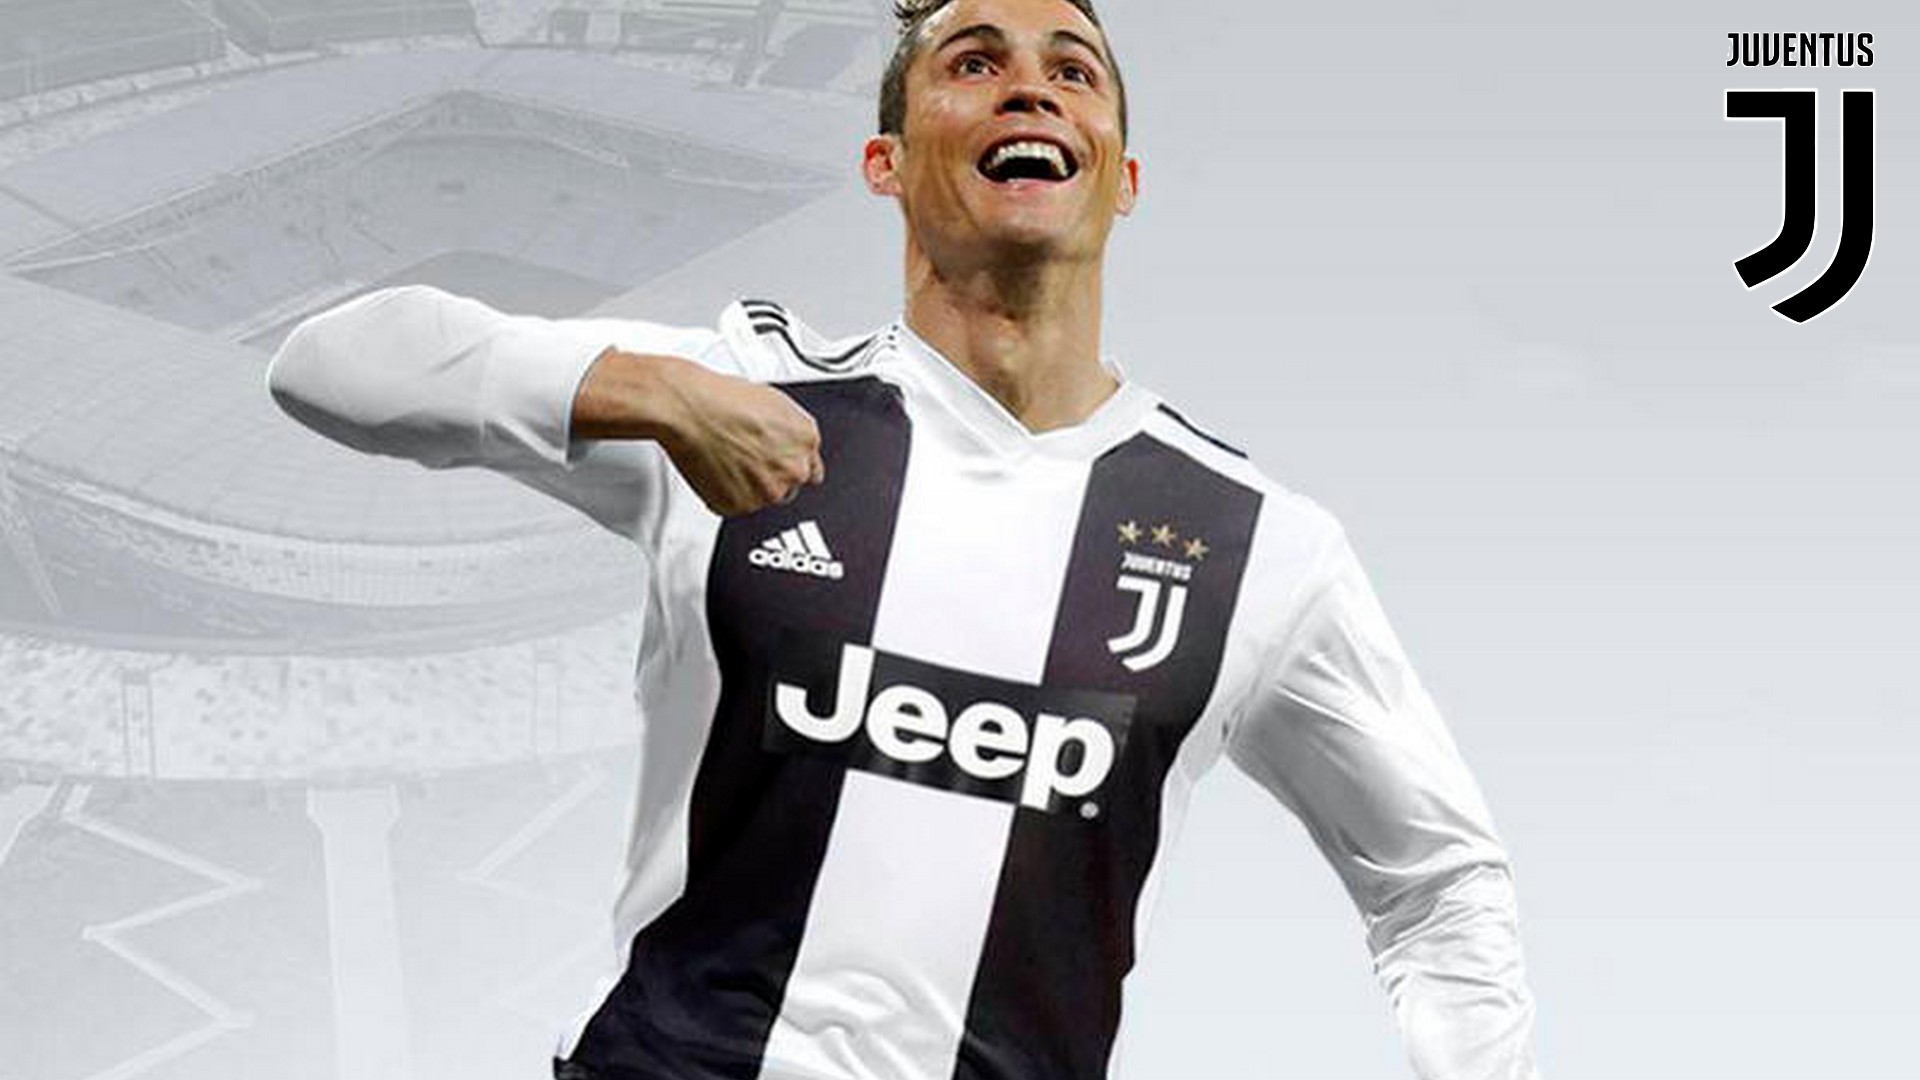 Ronaldo 7 Juventus Desktop Wallpapers With Resolution 1920X1080 pixel. You can make this wallpaper for your Mac or Windows Desktop Background, iPhone, Android or Tablet and another Smartphone device for free